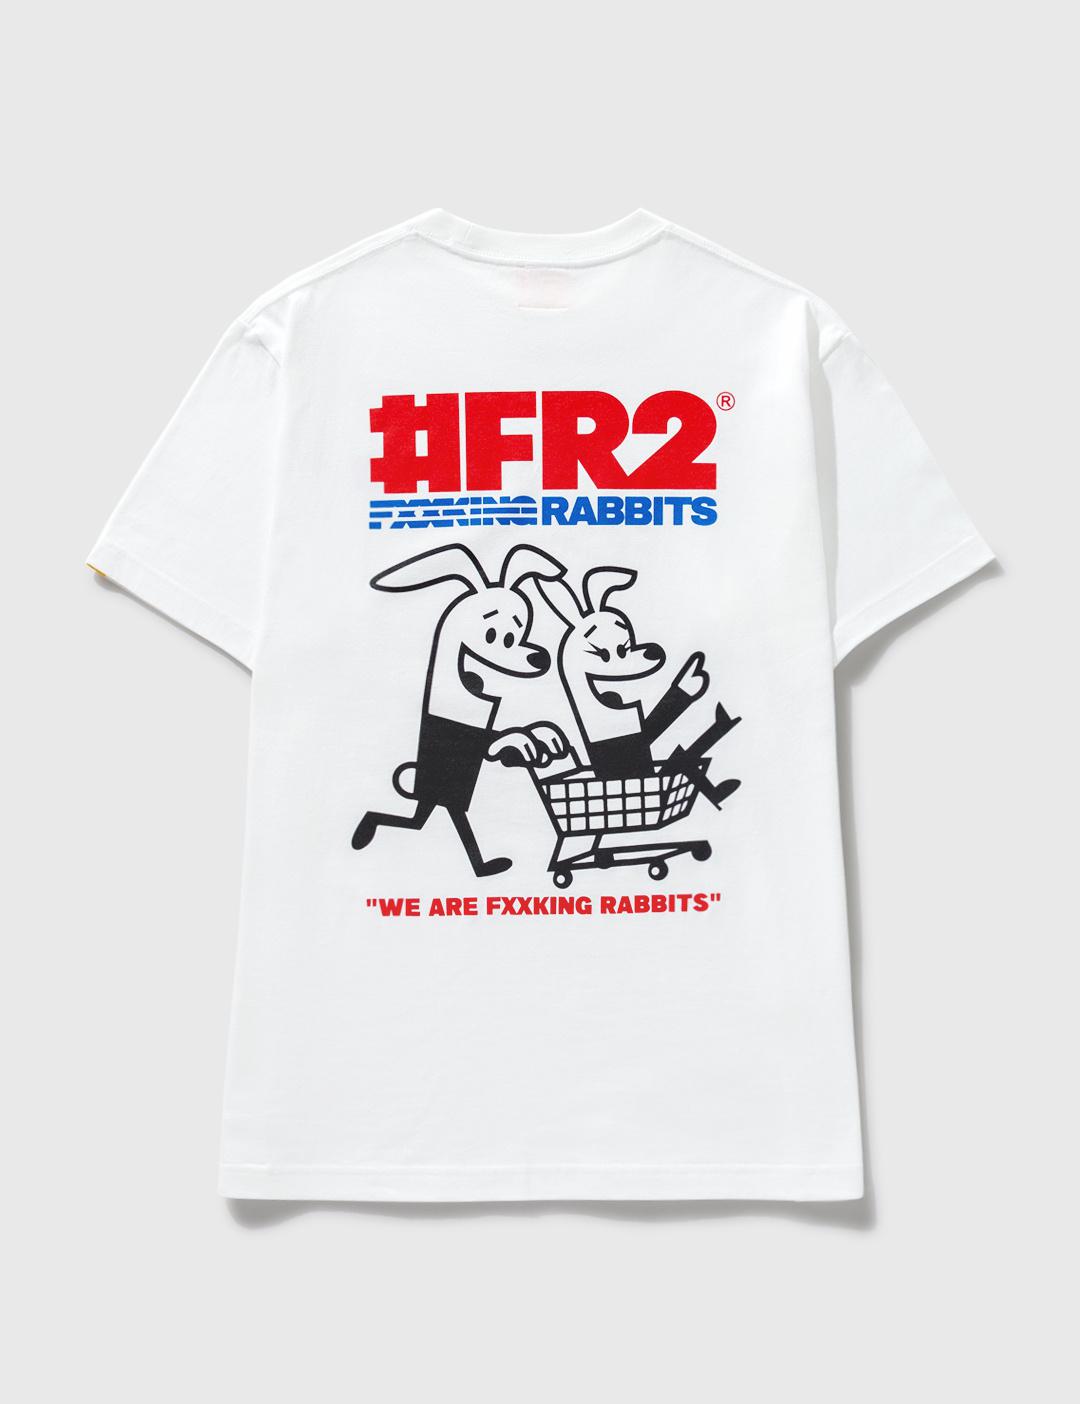 Ride On The Cart T-shirt by #FR2